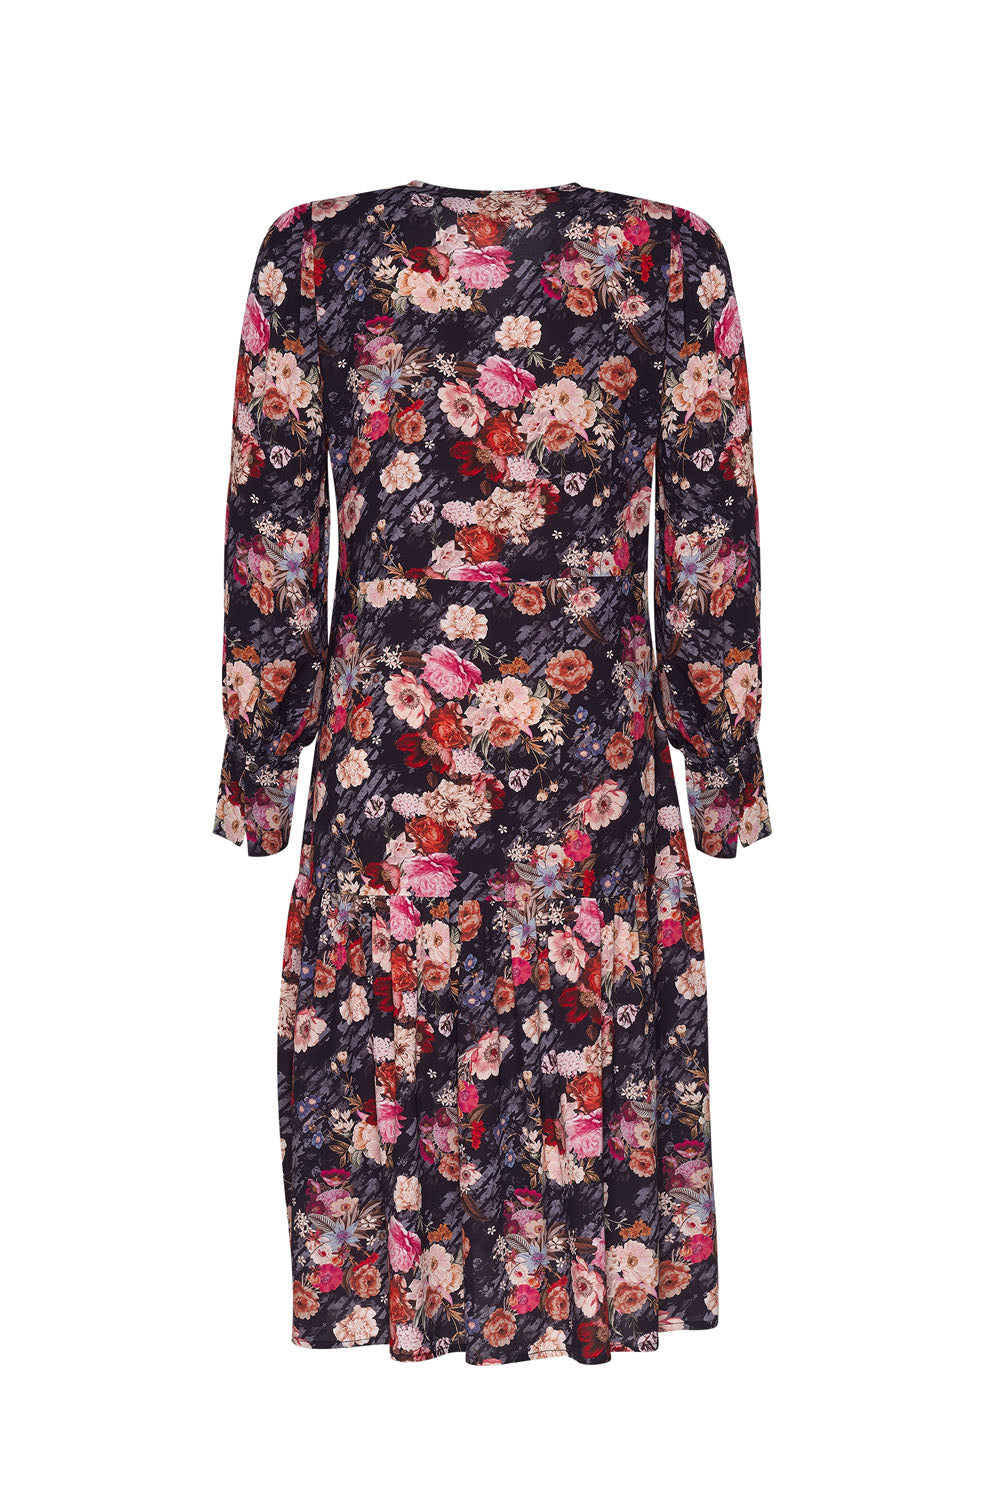 MADLY SWEETLY FLORIENT DRESS - THE VOGUE STORE